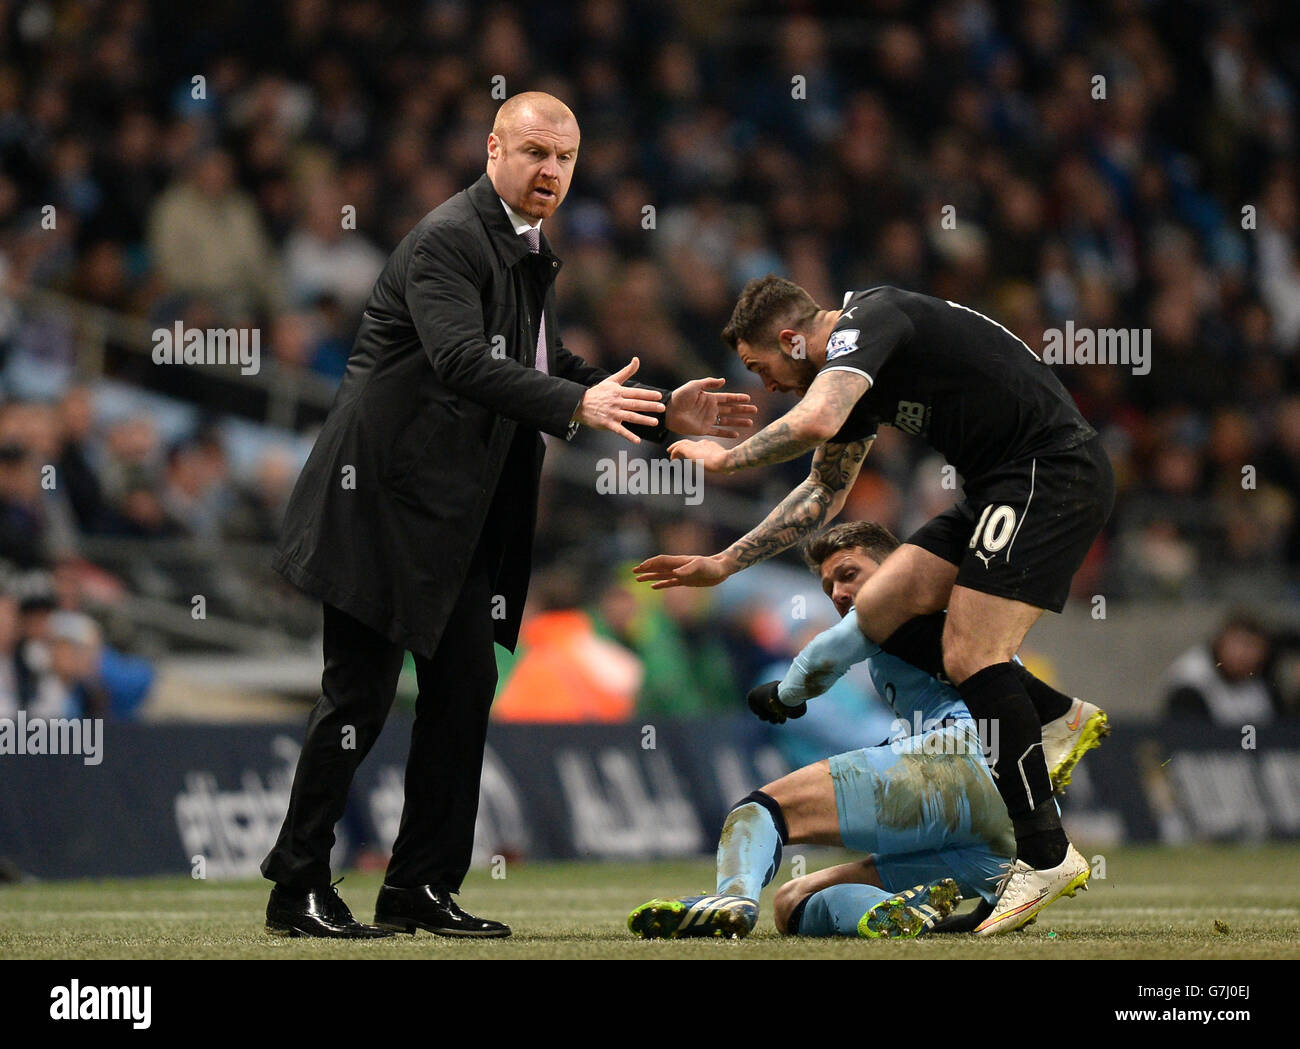 Burnley manager Sean Dyche (left) has to watch his step as Burnley's Danny Ings and Manchester City's Martin Demechellis tackle on the touchline during the Barclays Premier League match at the Etihad Stadium, Manchester. Stock Photo